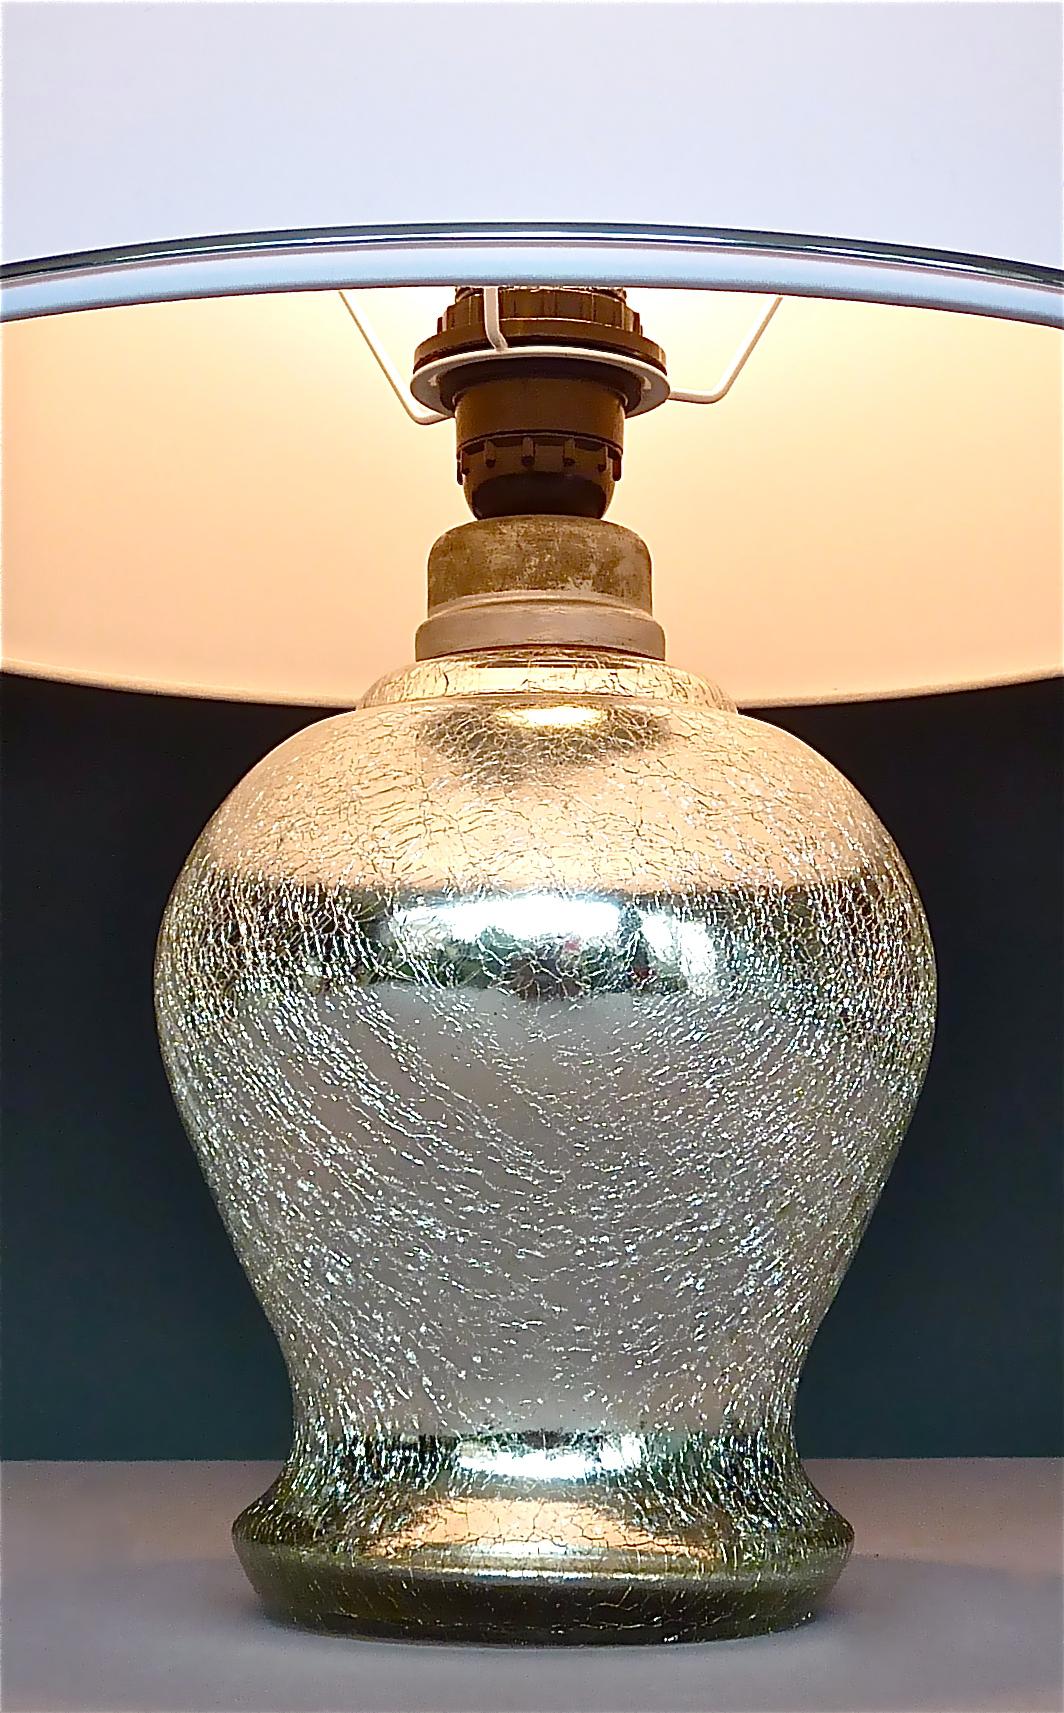 Rare Modernism Art Deco Table Lamp Silver Crackle Glass White Chrome France 1930 For Sale 3